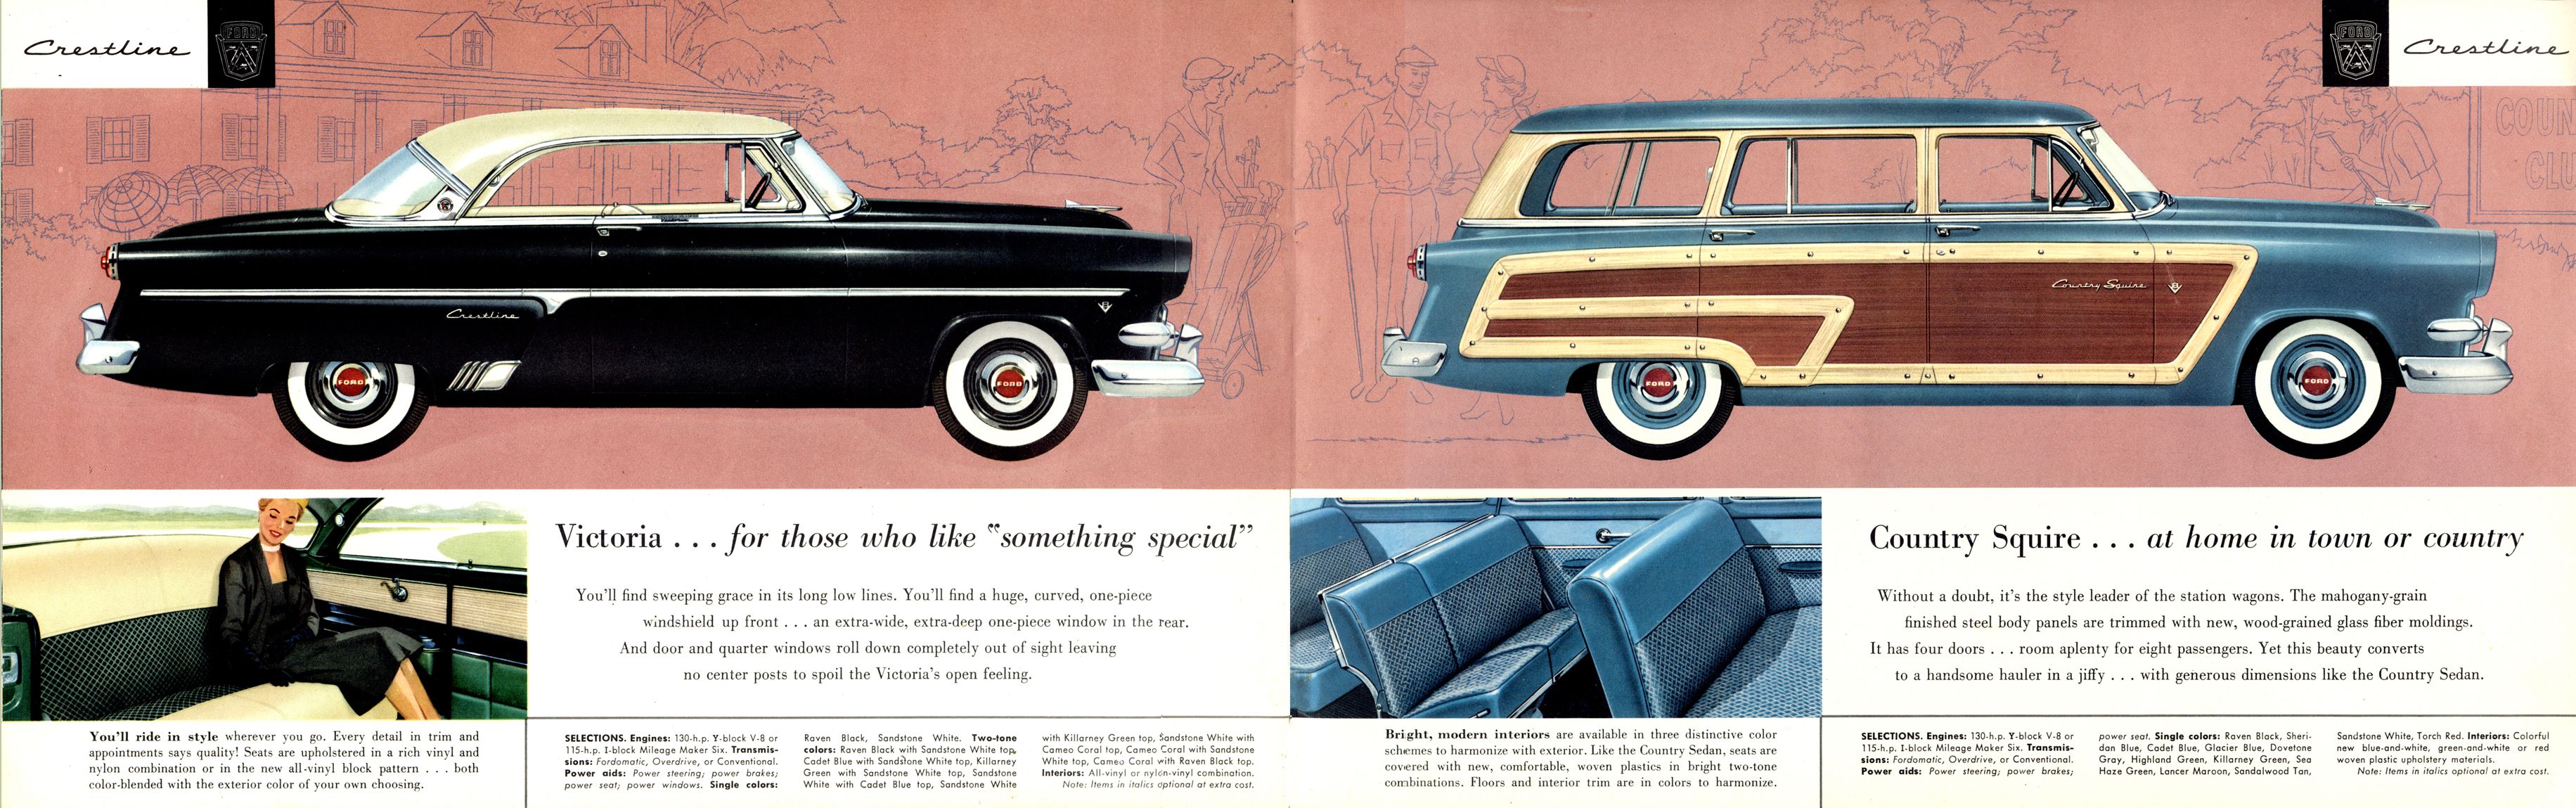 1954 Ford Brochure Page 2